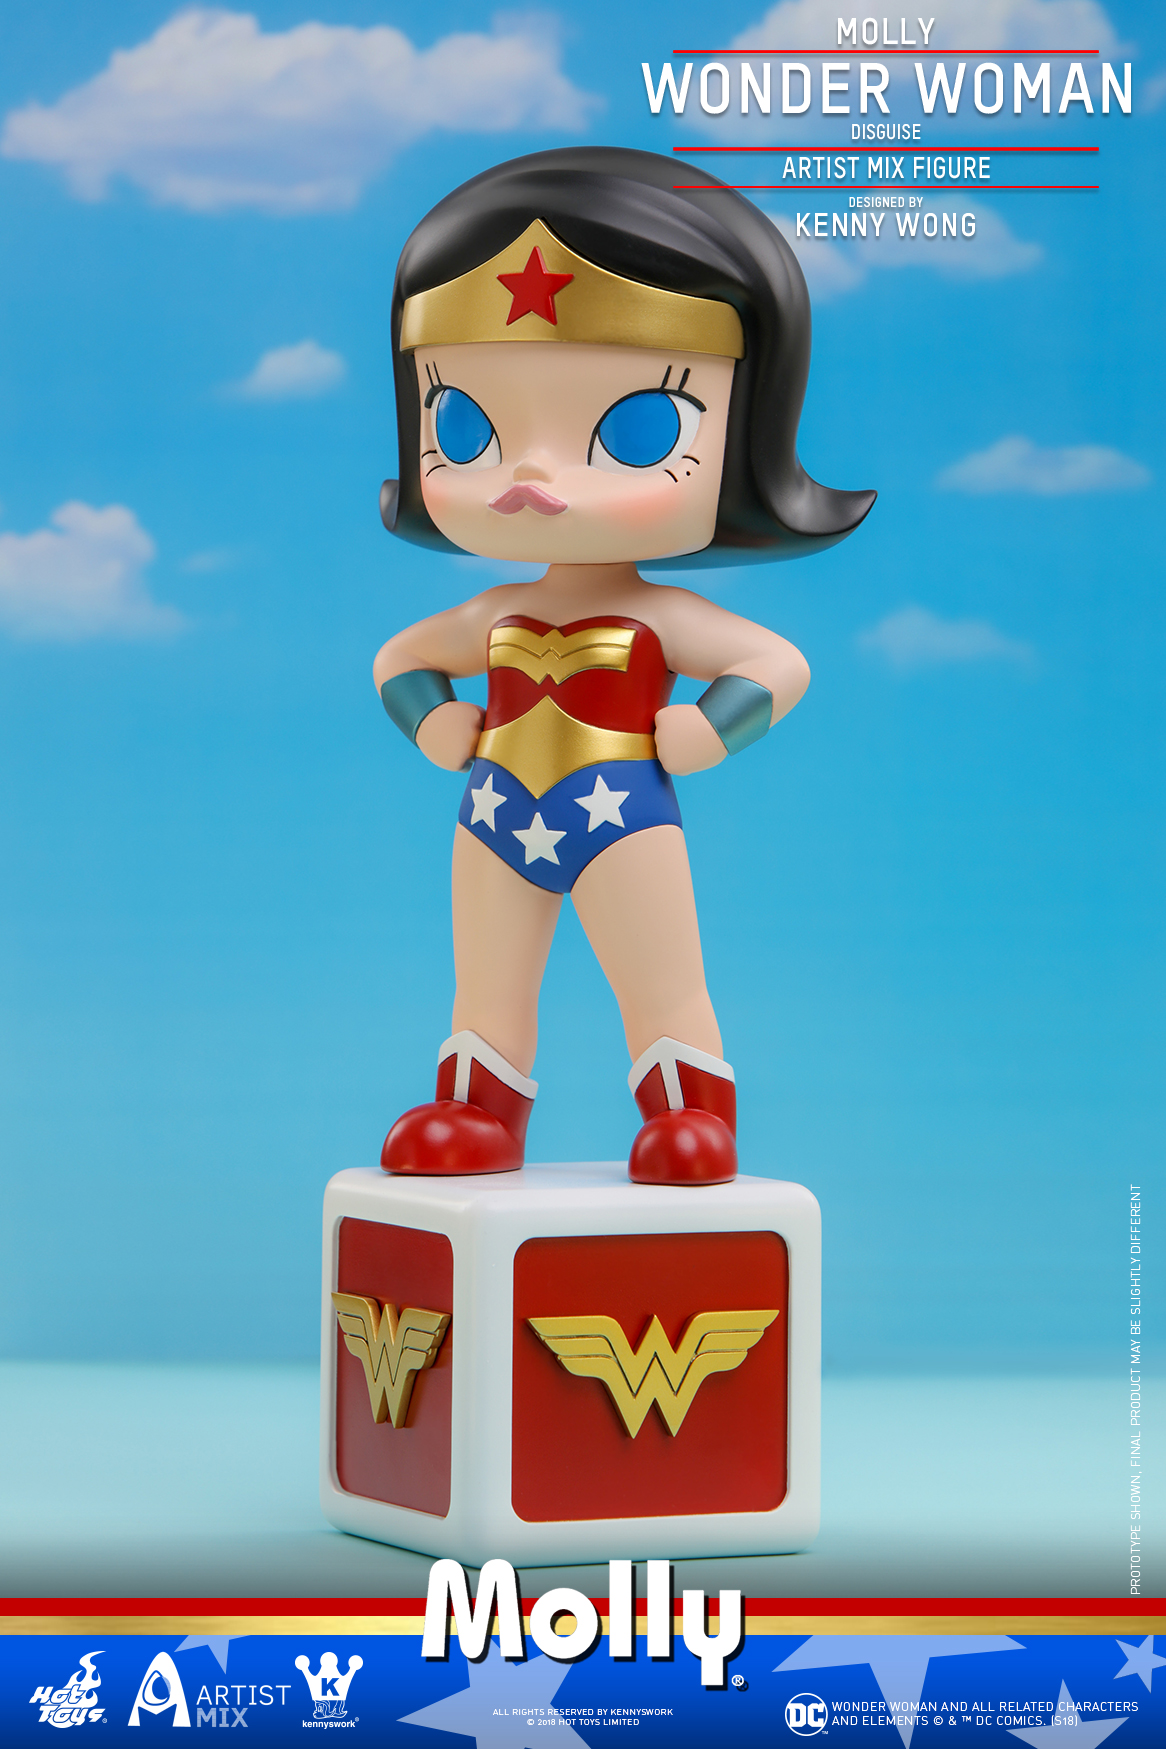 Hot Toys - Molly (Wonder Woman Disguise) Artist Mix Figure designed by Kenny Wong_PR2